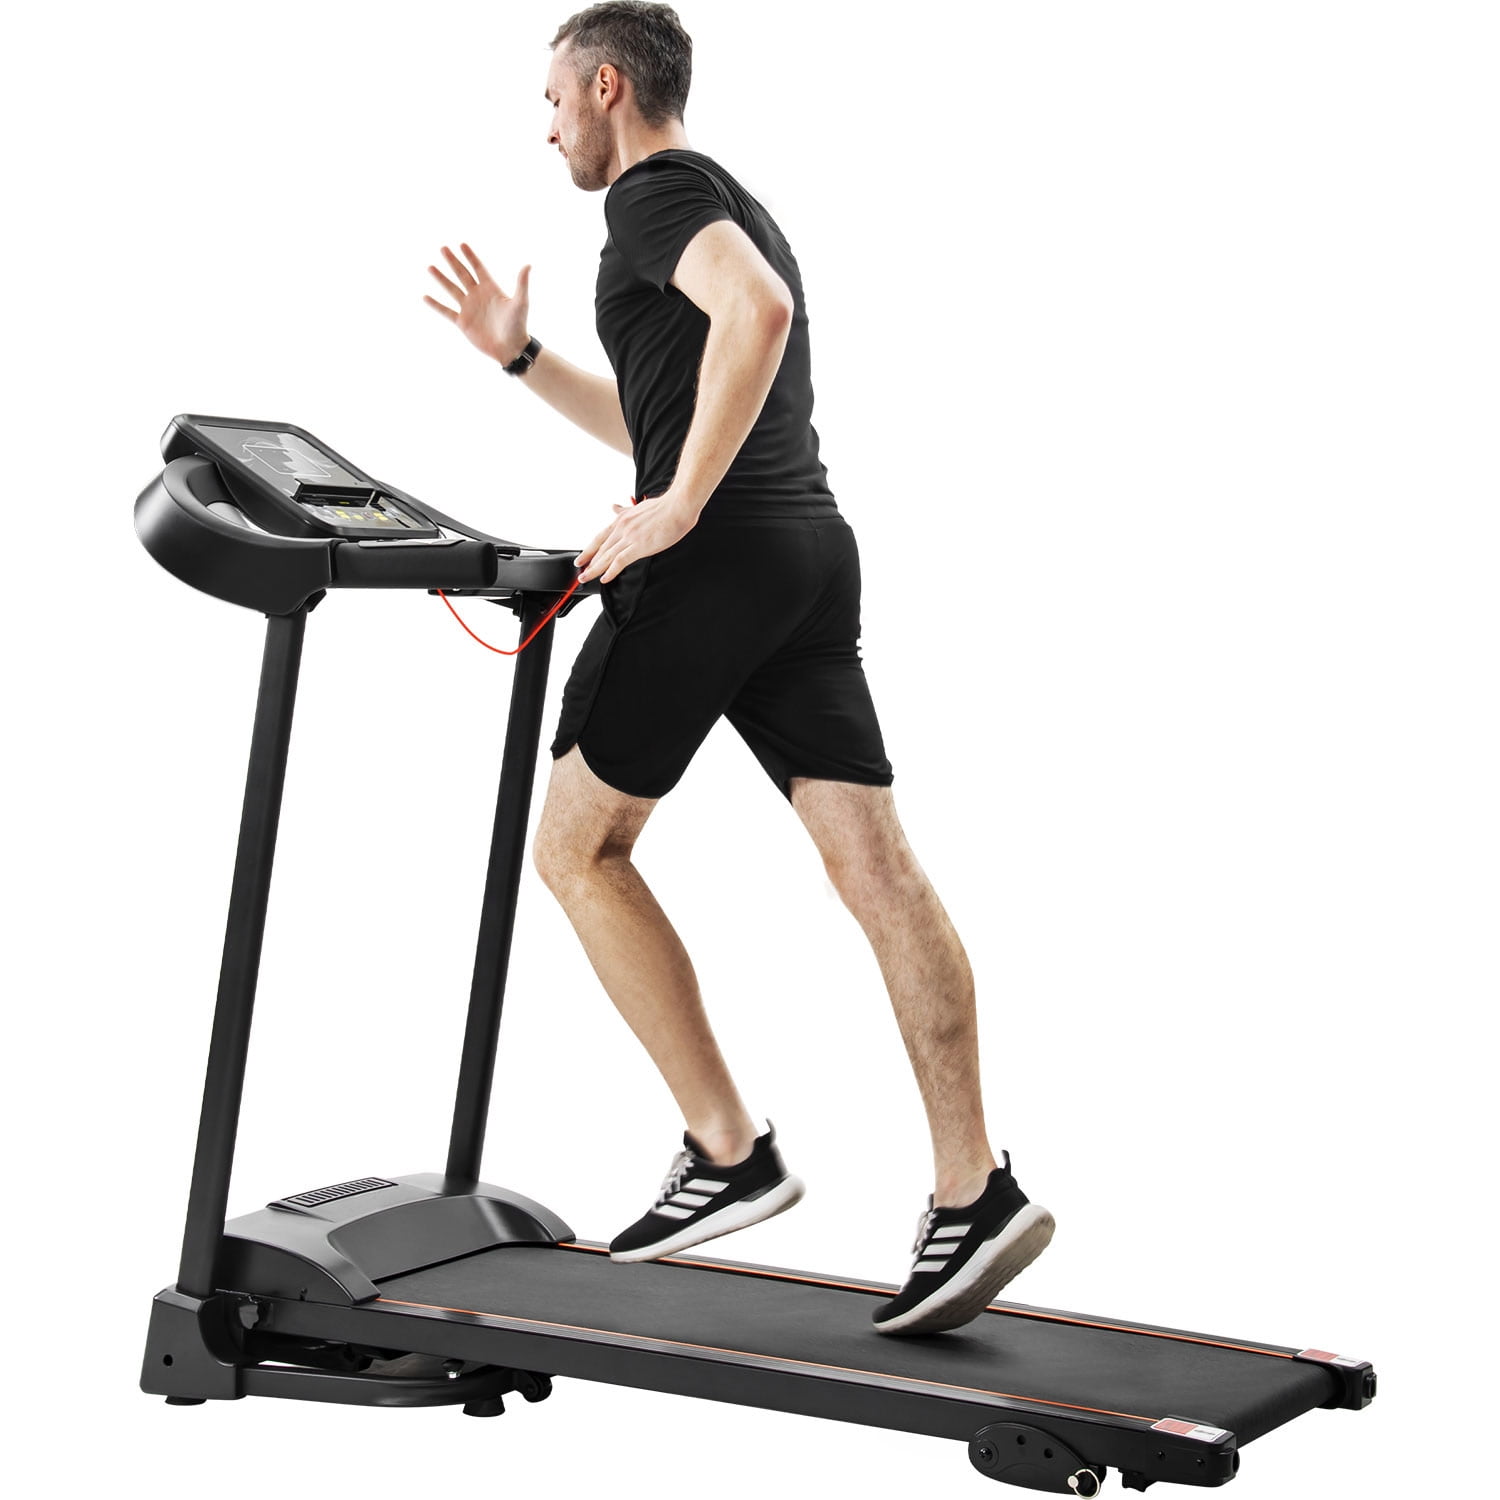 ZELUS Treadmill for Home or Office Heart Rate Monitor Folding Flat Treadmill with incline for Cardio Training up to 6.2mph 10 km/h Walking Running Machine with Free Sports 